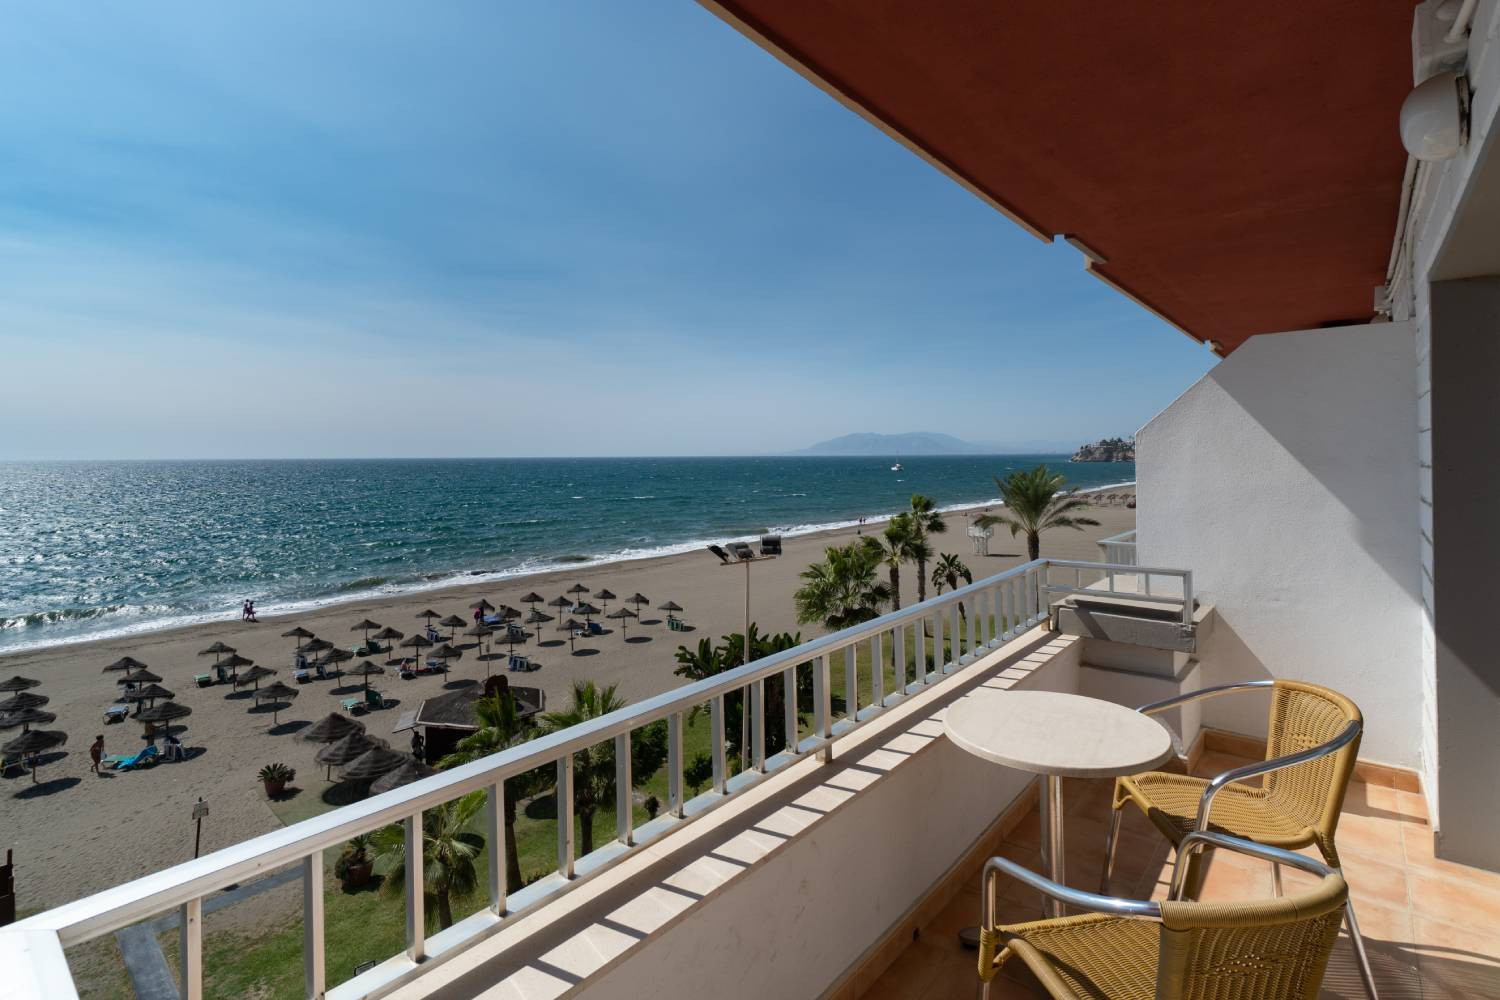 Sale of a 4 star hotel with 87 rooms on the beachfront and with high potential on the Costa del Sol | Image 13